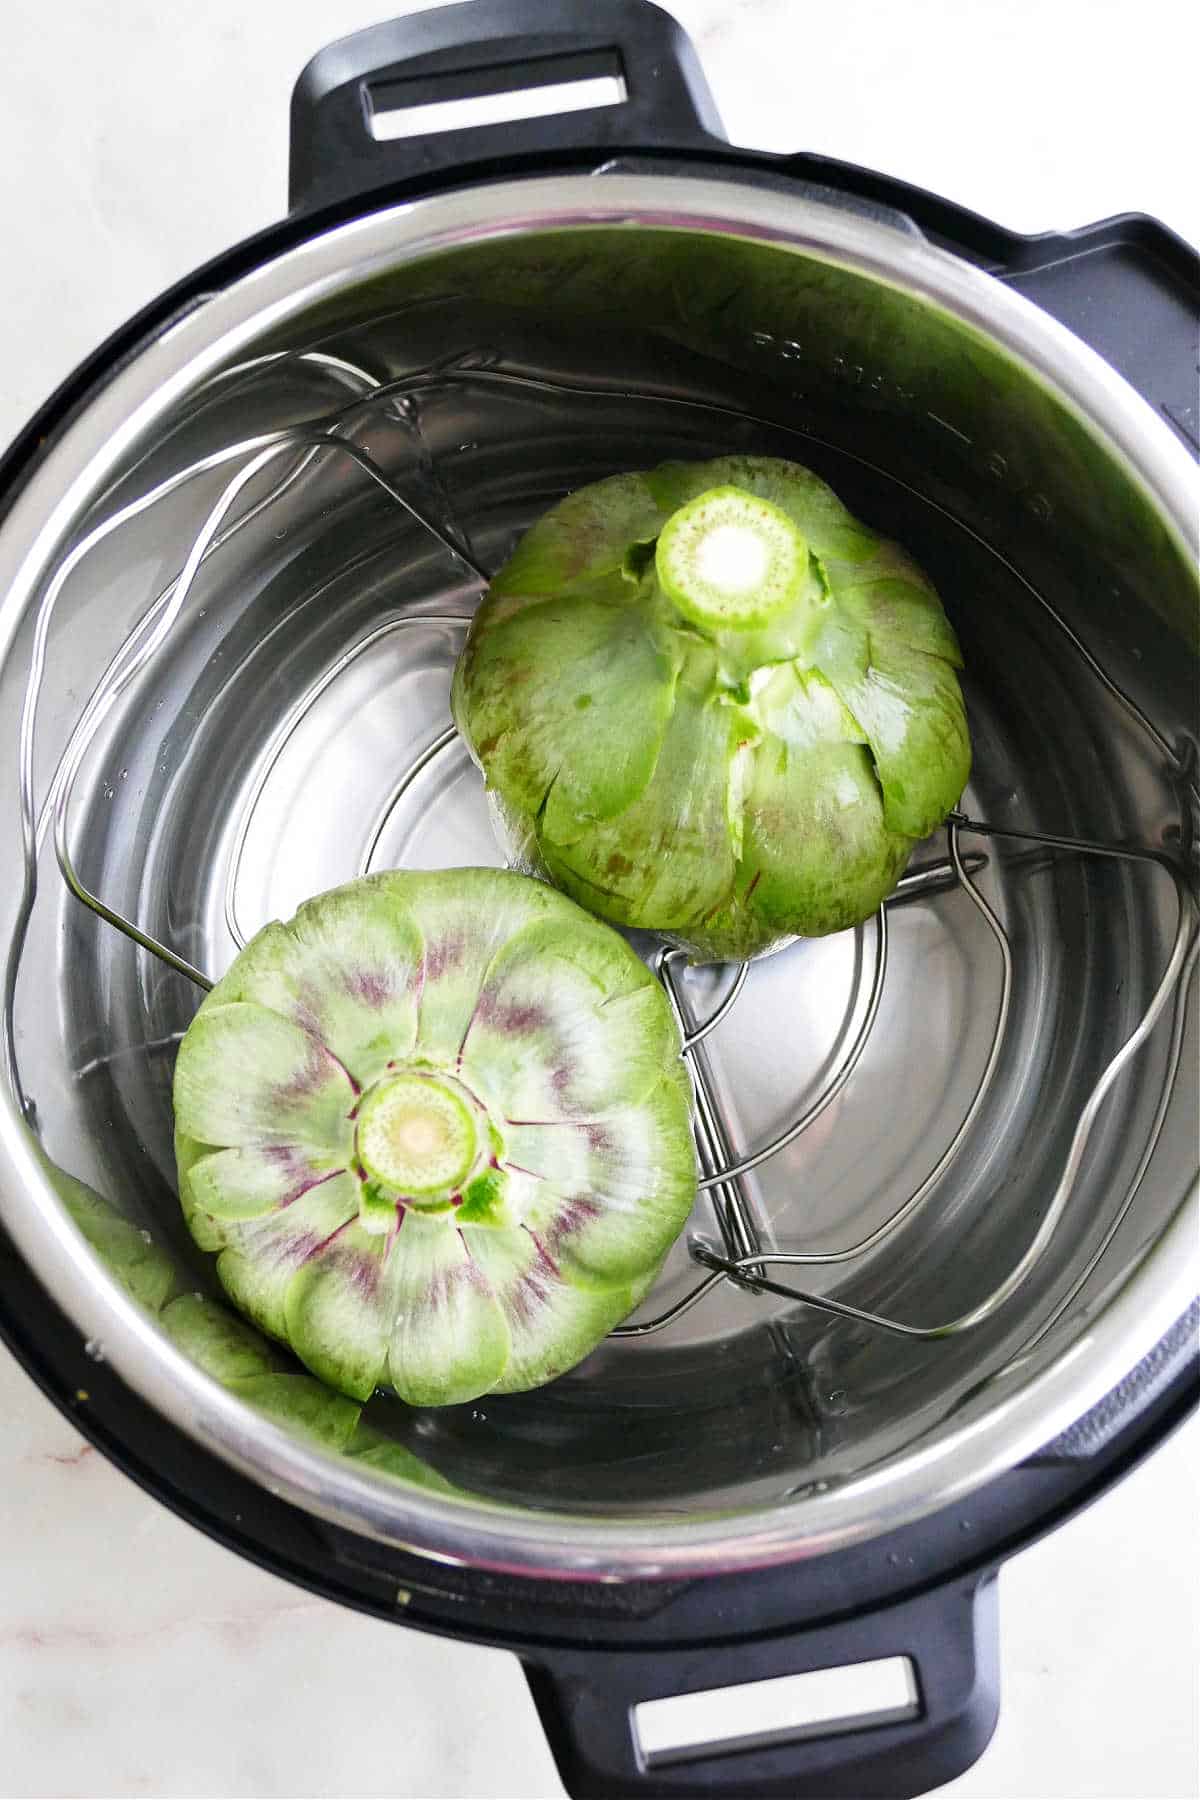 How To Cook Artichoke In Electric Pressure Cooker